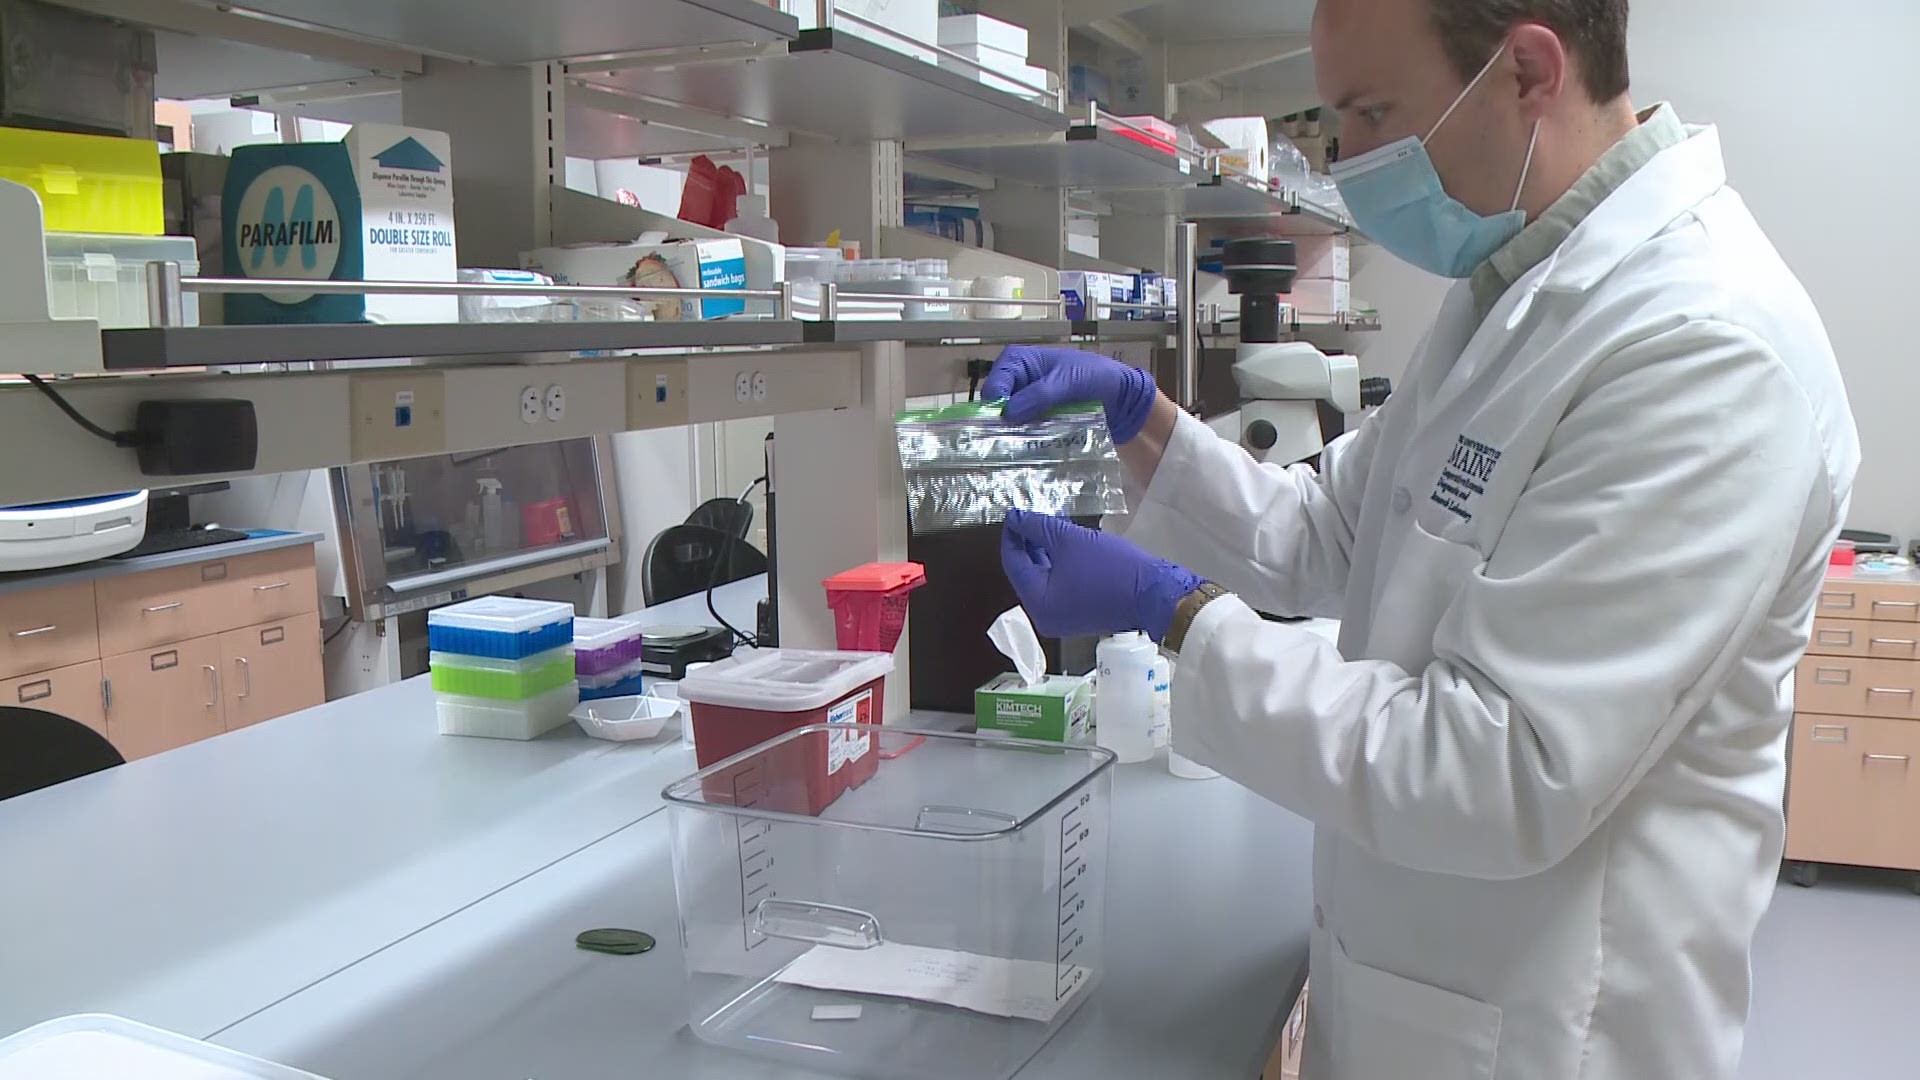 University of Maine scientists identify ticks and test them for pathogens.